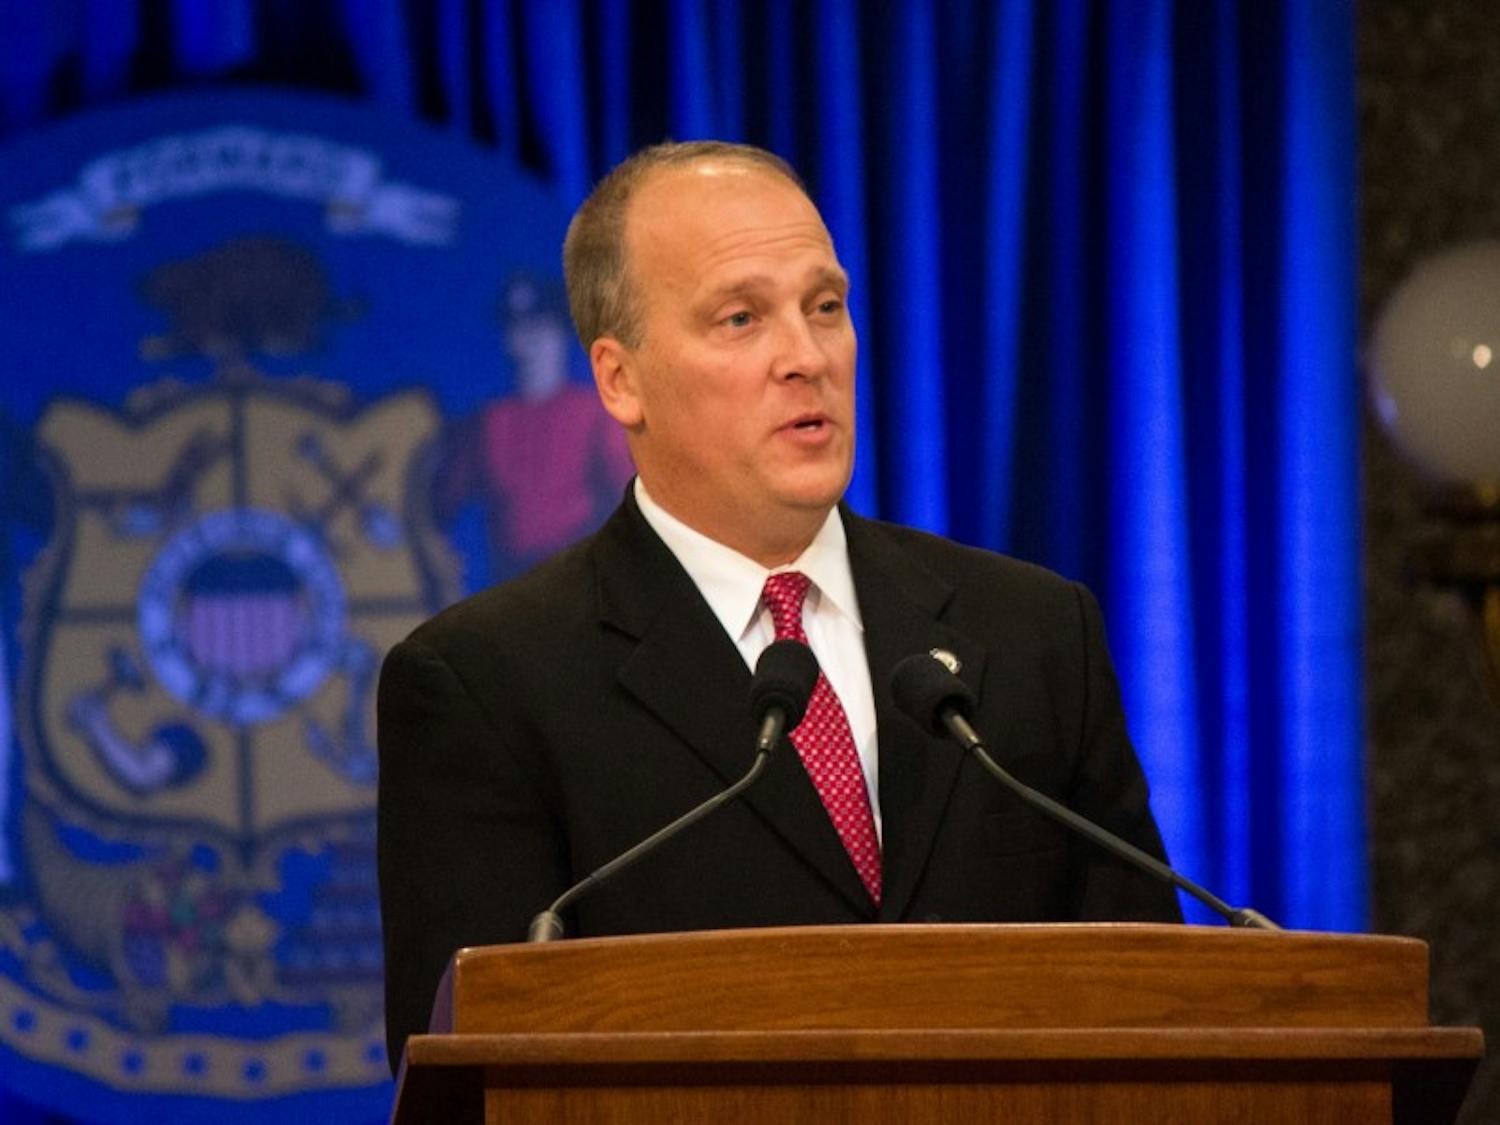 State Attorney General Brad Schimel is joining a coalition of 20 other states in challenging recent changes to federal overtime rules.